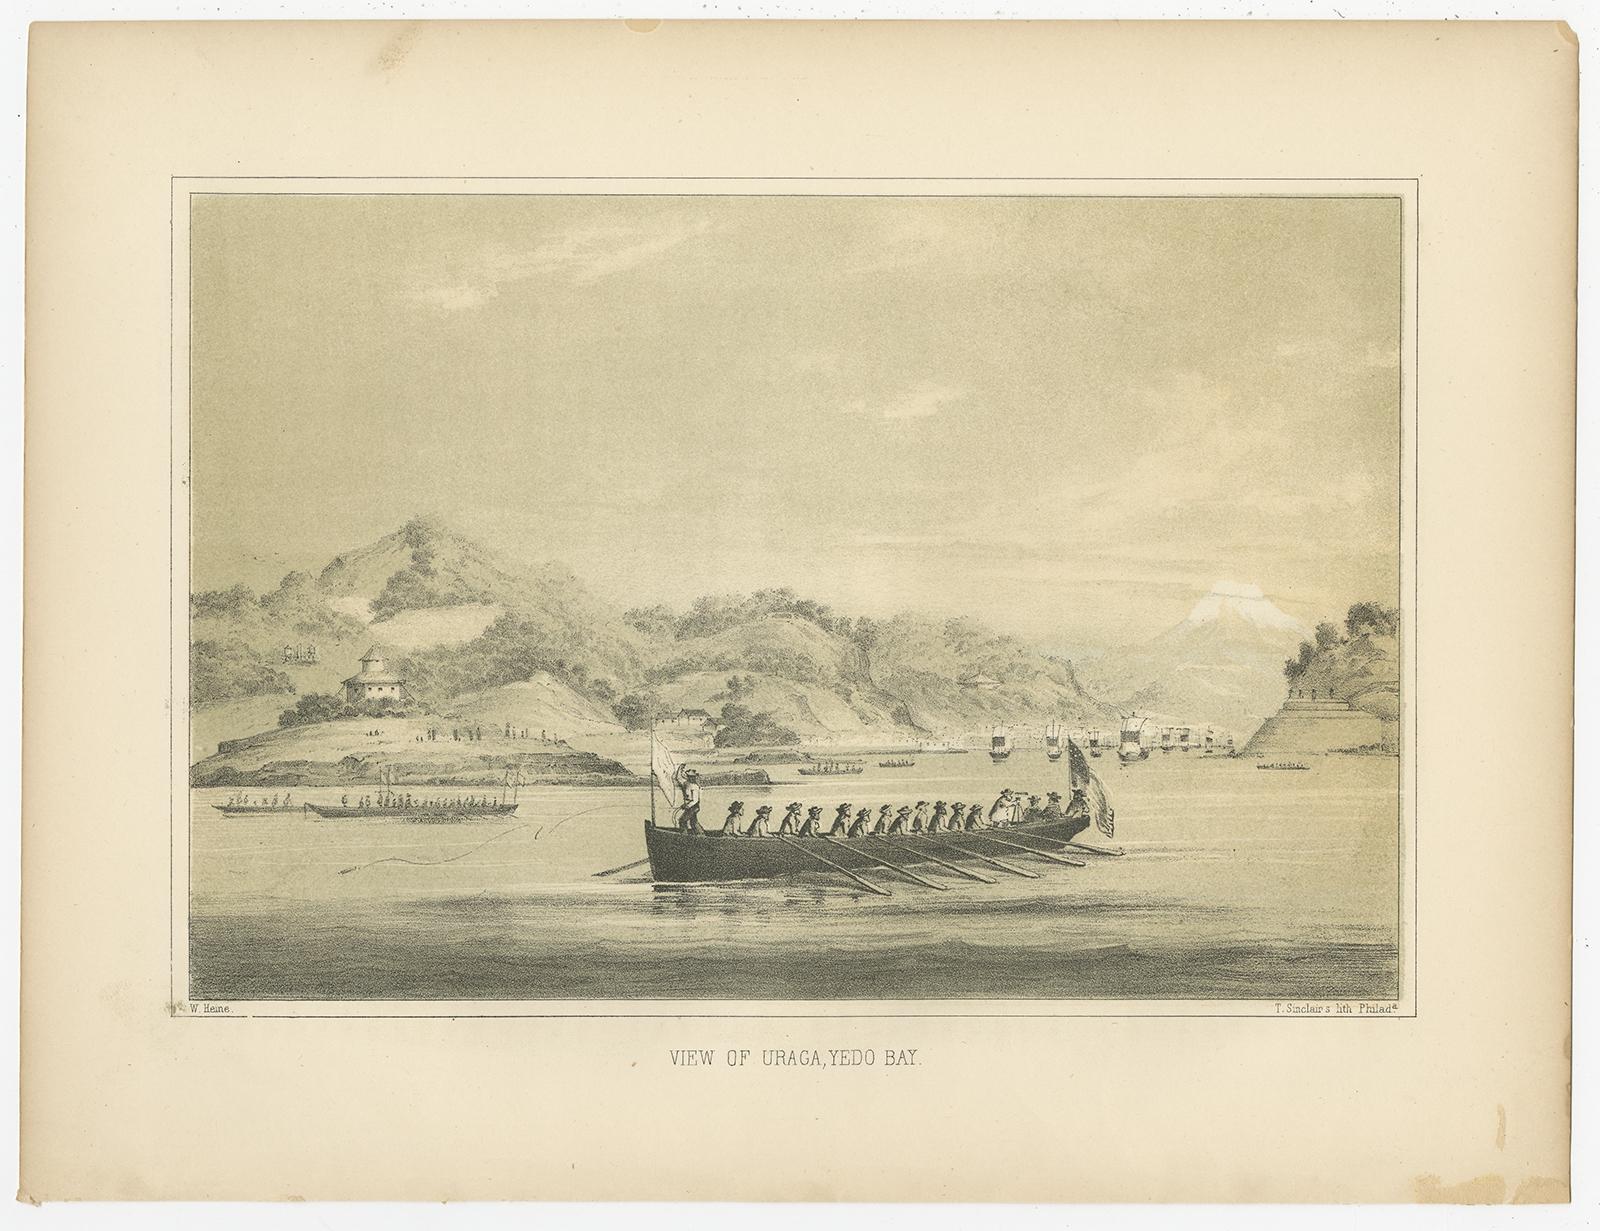 Description: Antique print titled ‘View of Uraga, Yedo Bay'. View of Uraga, Japan. 

This print originates from 'Narrative of the expedition of an American squadron to the China seas and Japan, performed in the years 1852, 1853, and 1854, under